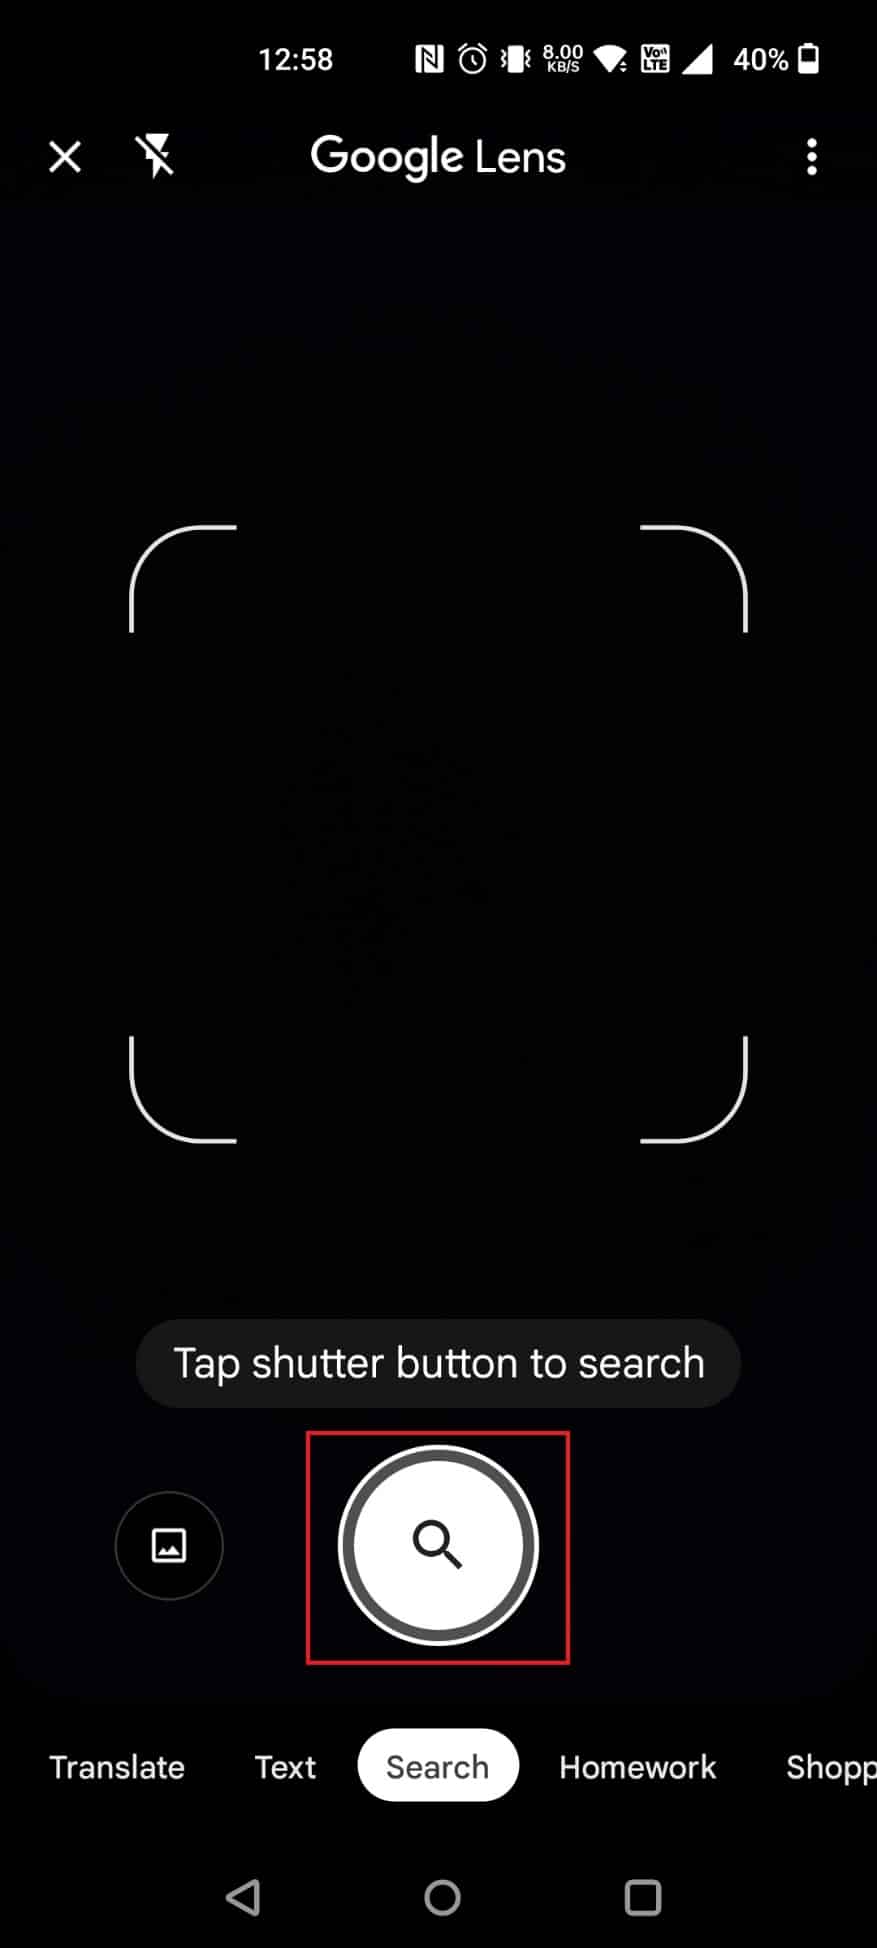 Tap on the search icon, and a URL will appear on the screen, directing you to your webpage